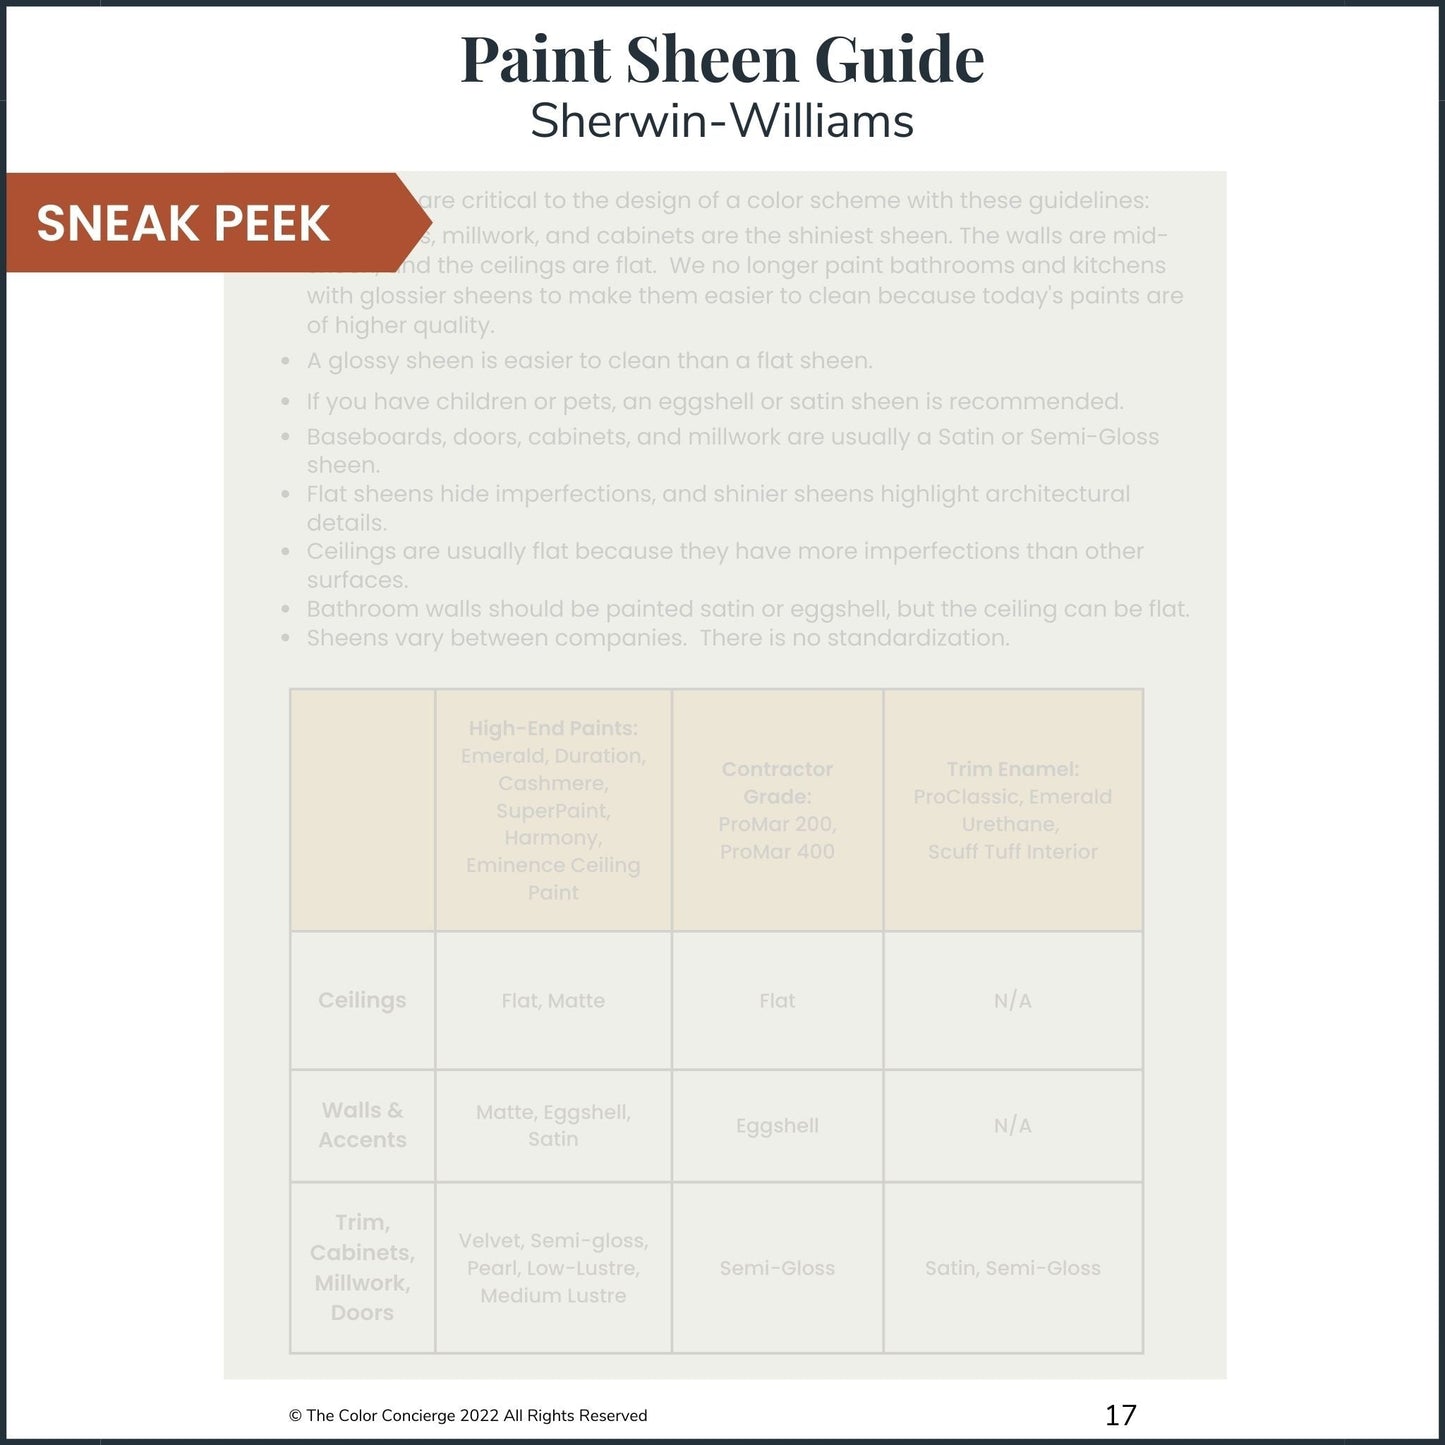 A paint sheen guide for a Sherwin-Williams City Loft color palette guide